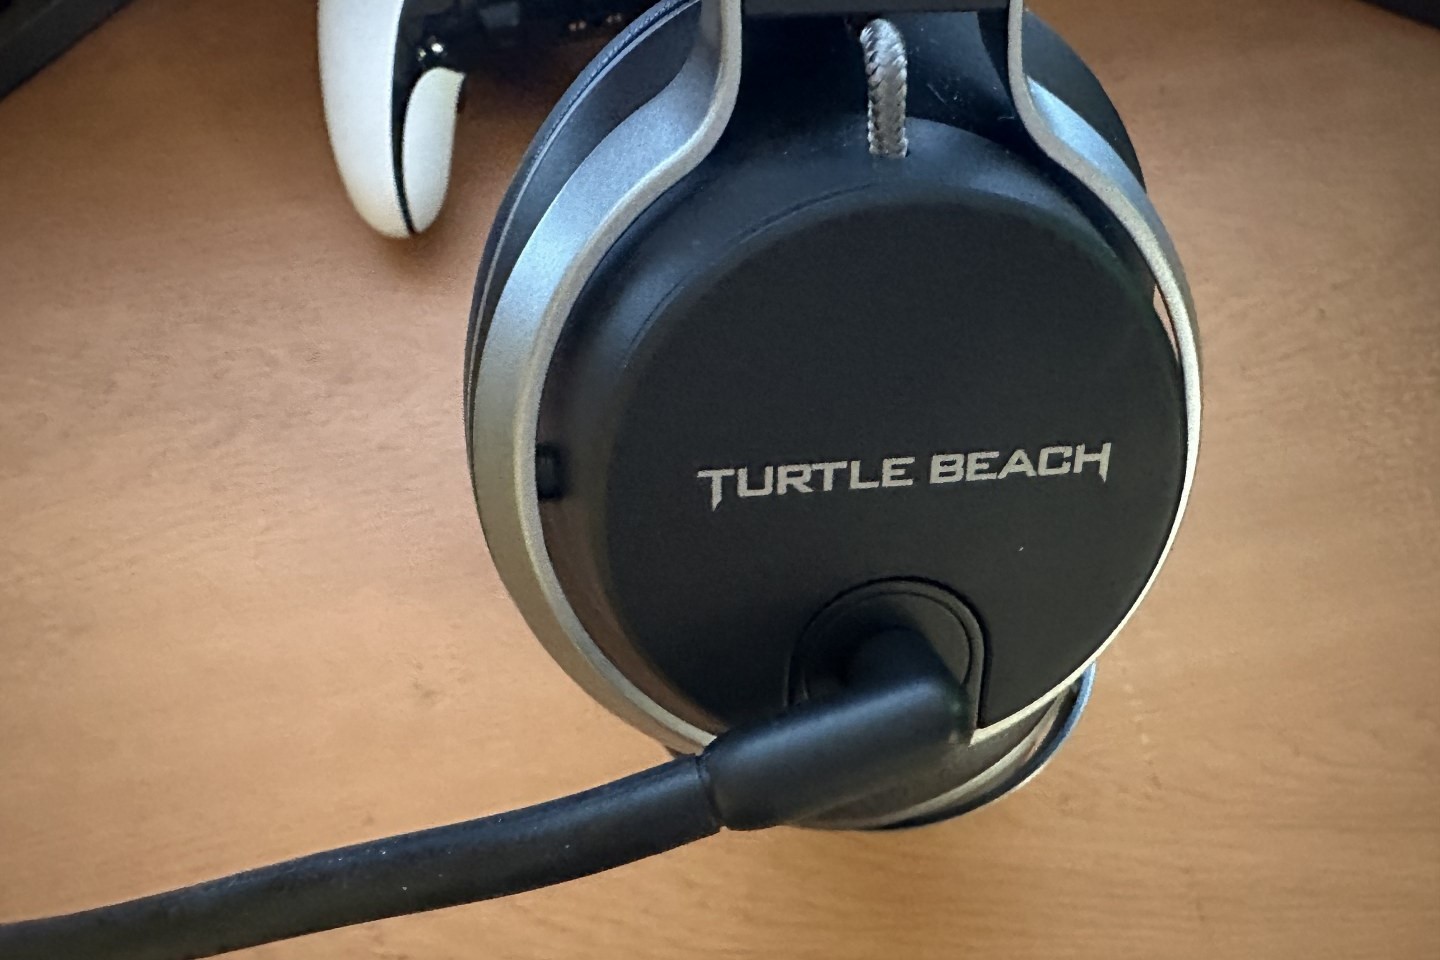 Turtle Beach Headset Charging Time: What To Expect